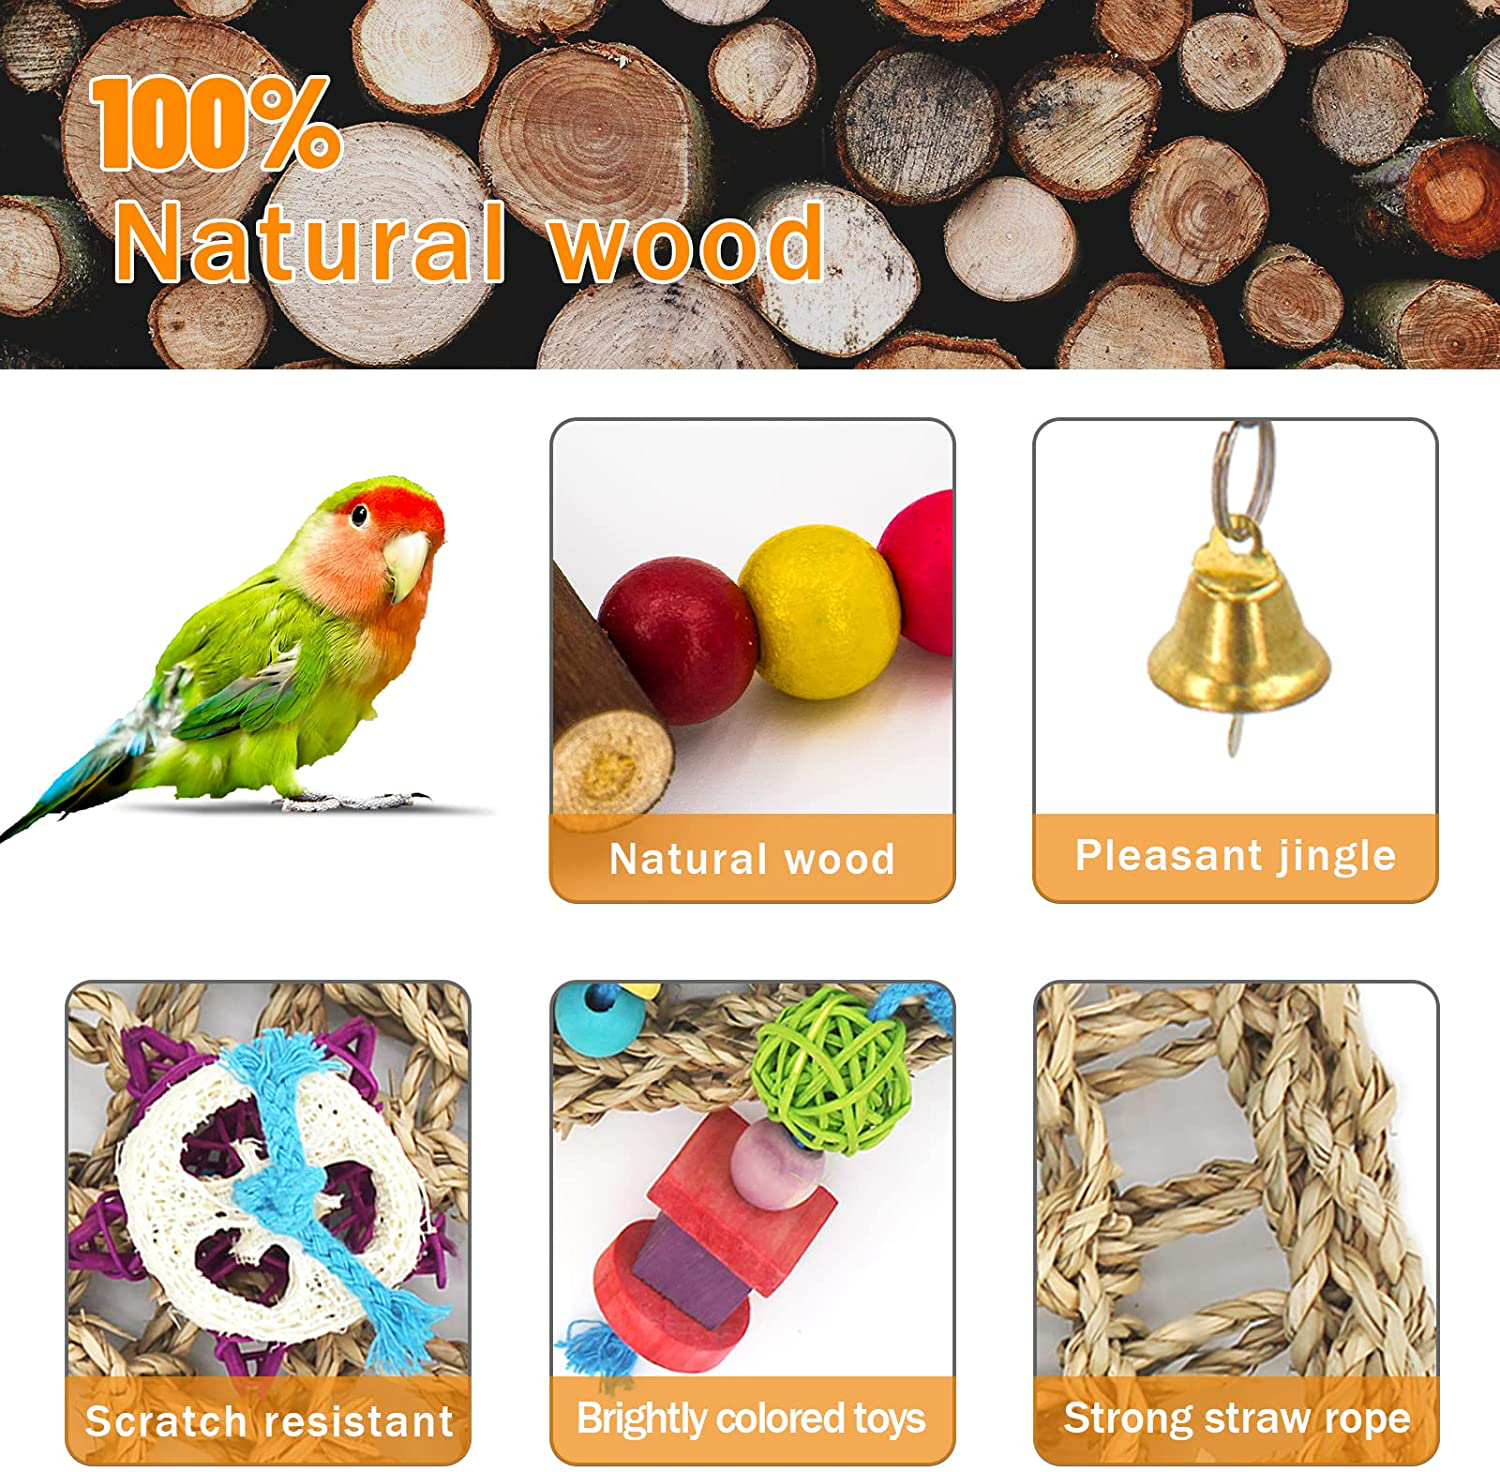 MHHOL Bird Parakeet Toys, Bird Foraging Wall Toy, Bird Perches Swing, Edible Seagrass Woven Climbing Hammock Mat with Chewing Toys, Bird Shredder Toys, for Parrots, Conures, Cockatiels, Budgies